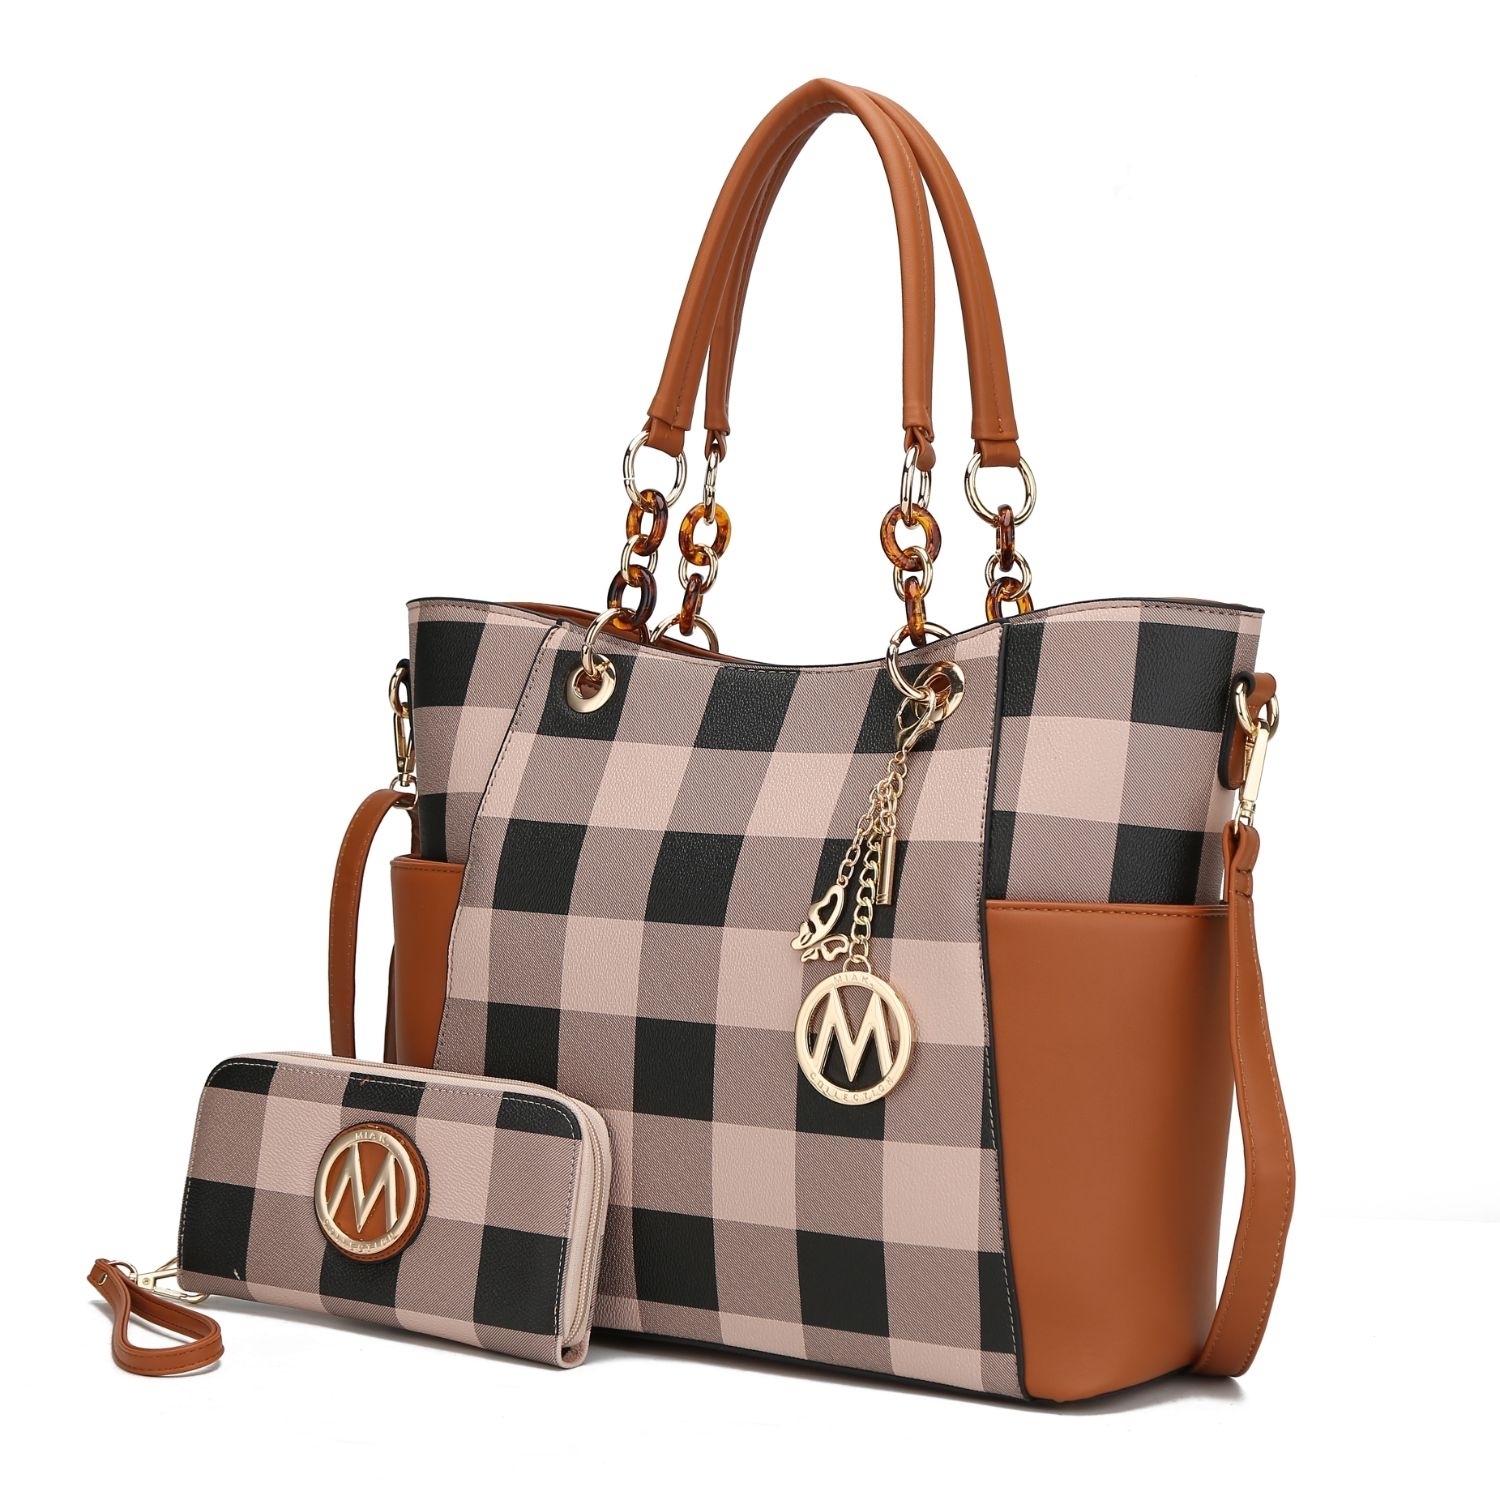 Bonita Checkered Tote 2 Pcs Wome's Large Handbag With Wallet And Decorative M Keychain By Mia K. - Cognac Brown